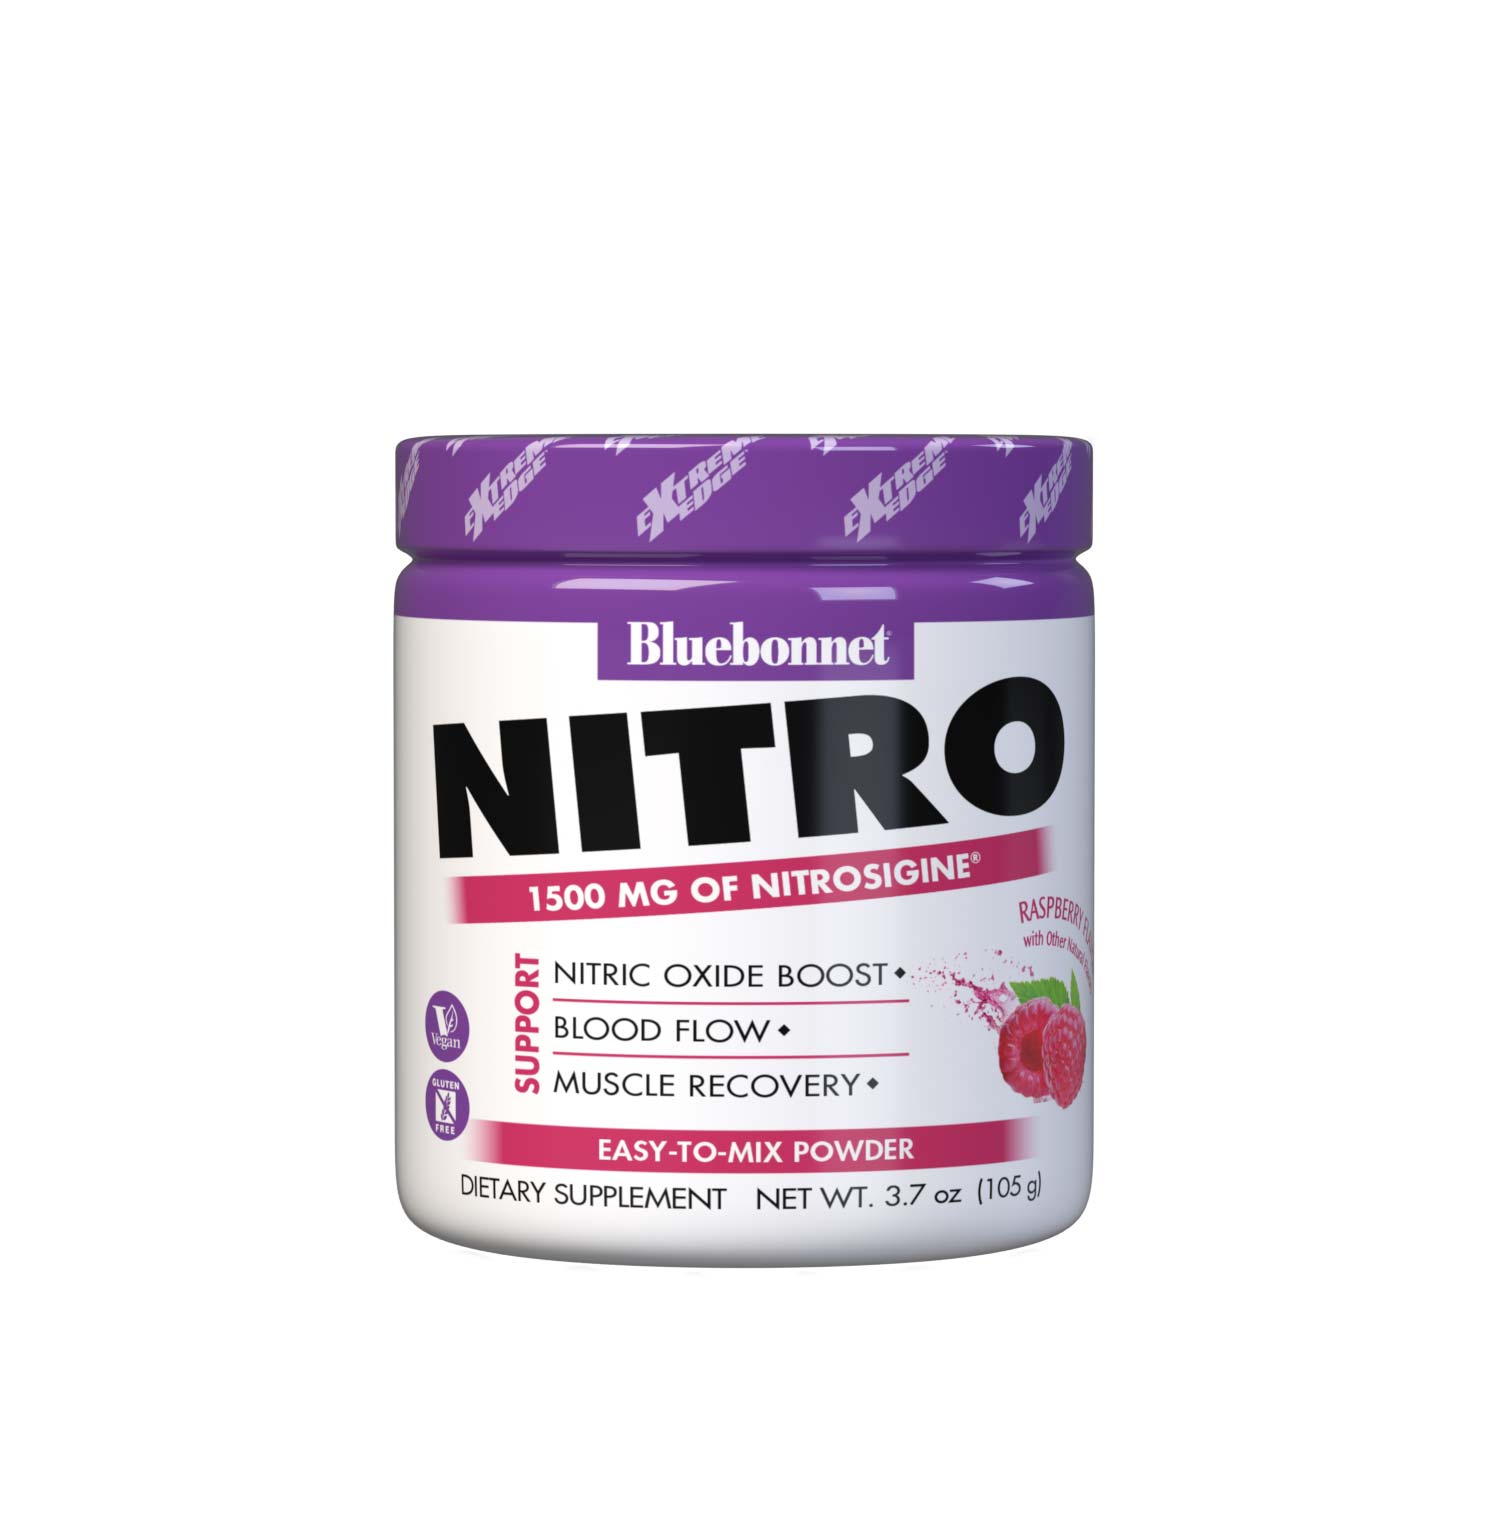 NITRO features clinically studied Nitrosigine, a patented complex of bonded arginine silicate stabilized with inositol, that has been scientifically engineered to significantly boost nitric oxide (NO) levels. NO is a key factor in promoting the relaxation of smooth muscle in blood vessels, thus increasing blood flow to the heart and working muscles. Optimal blood flow allows you to sustain a high level of training intensity. #size_3.7 oz